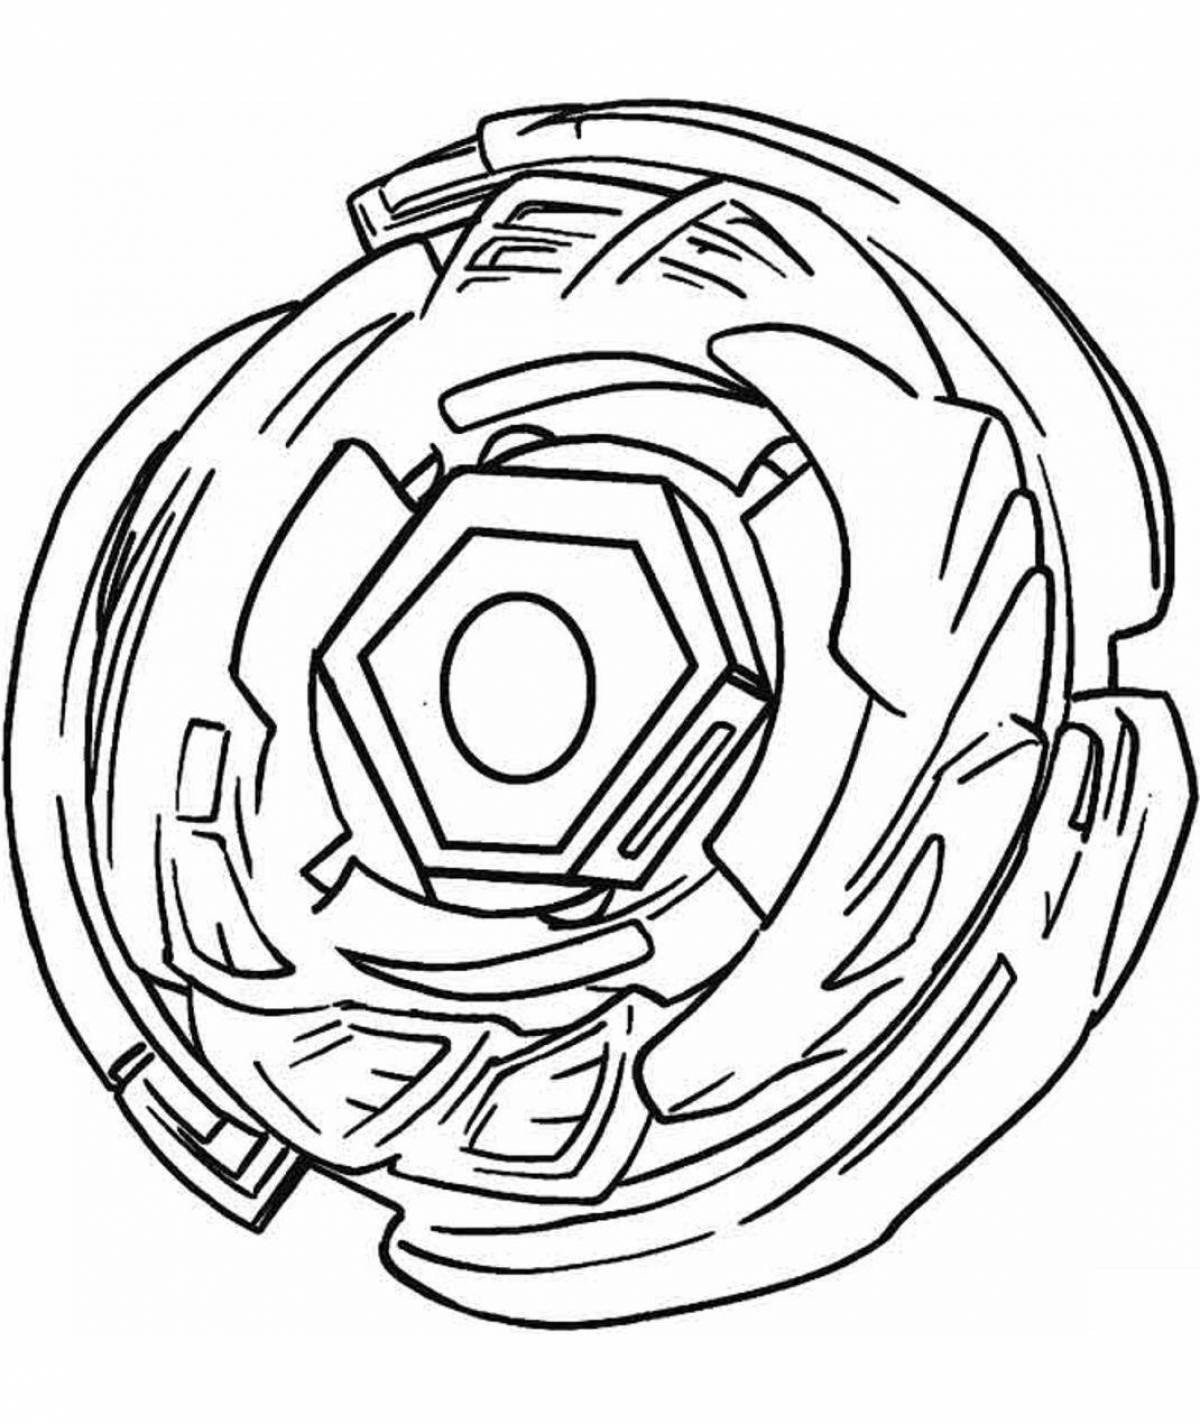 Coloring page hypnotic spinning top